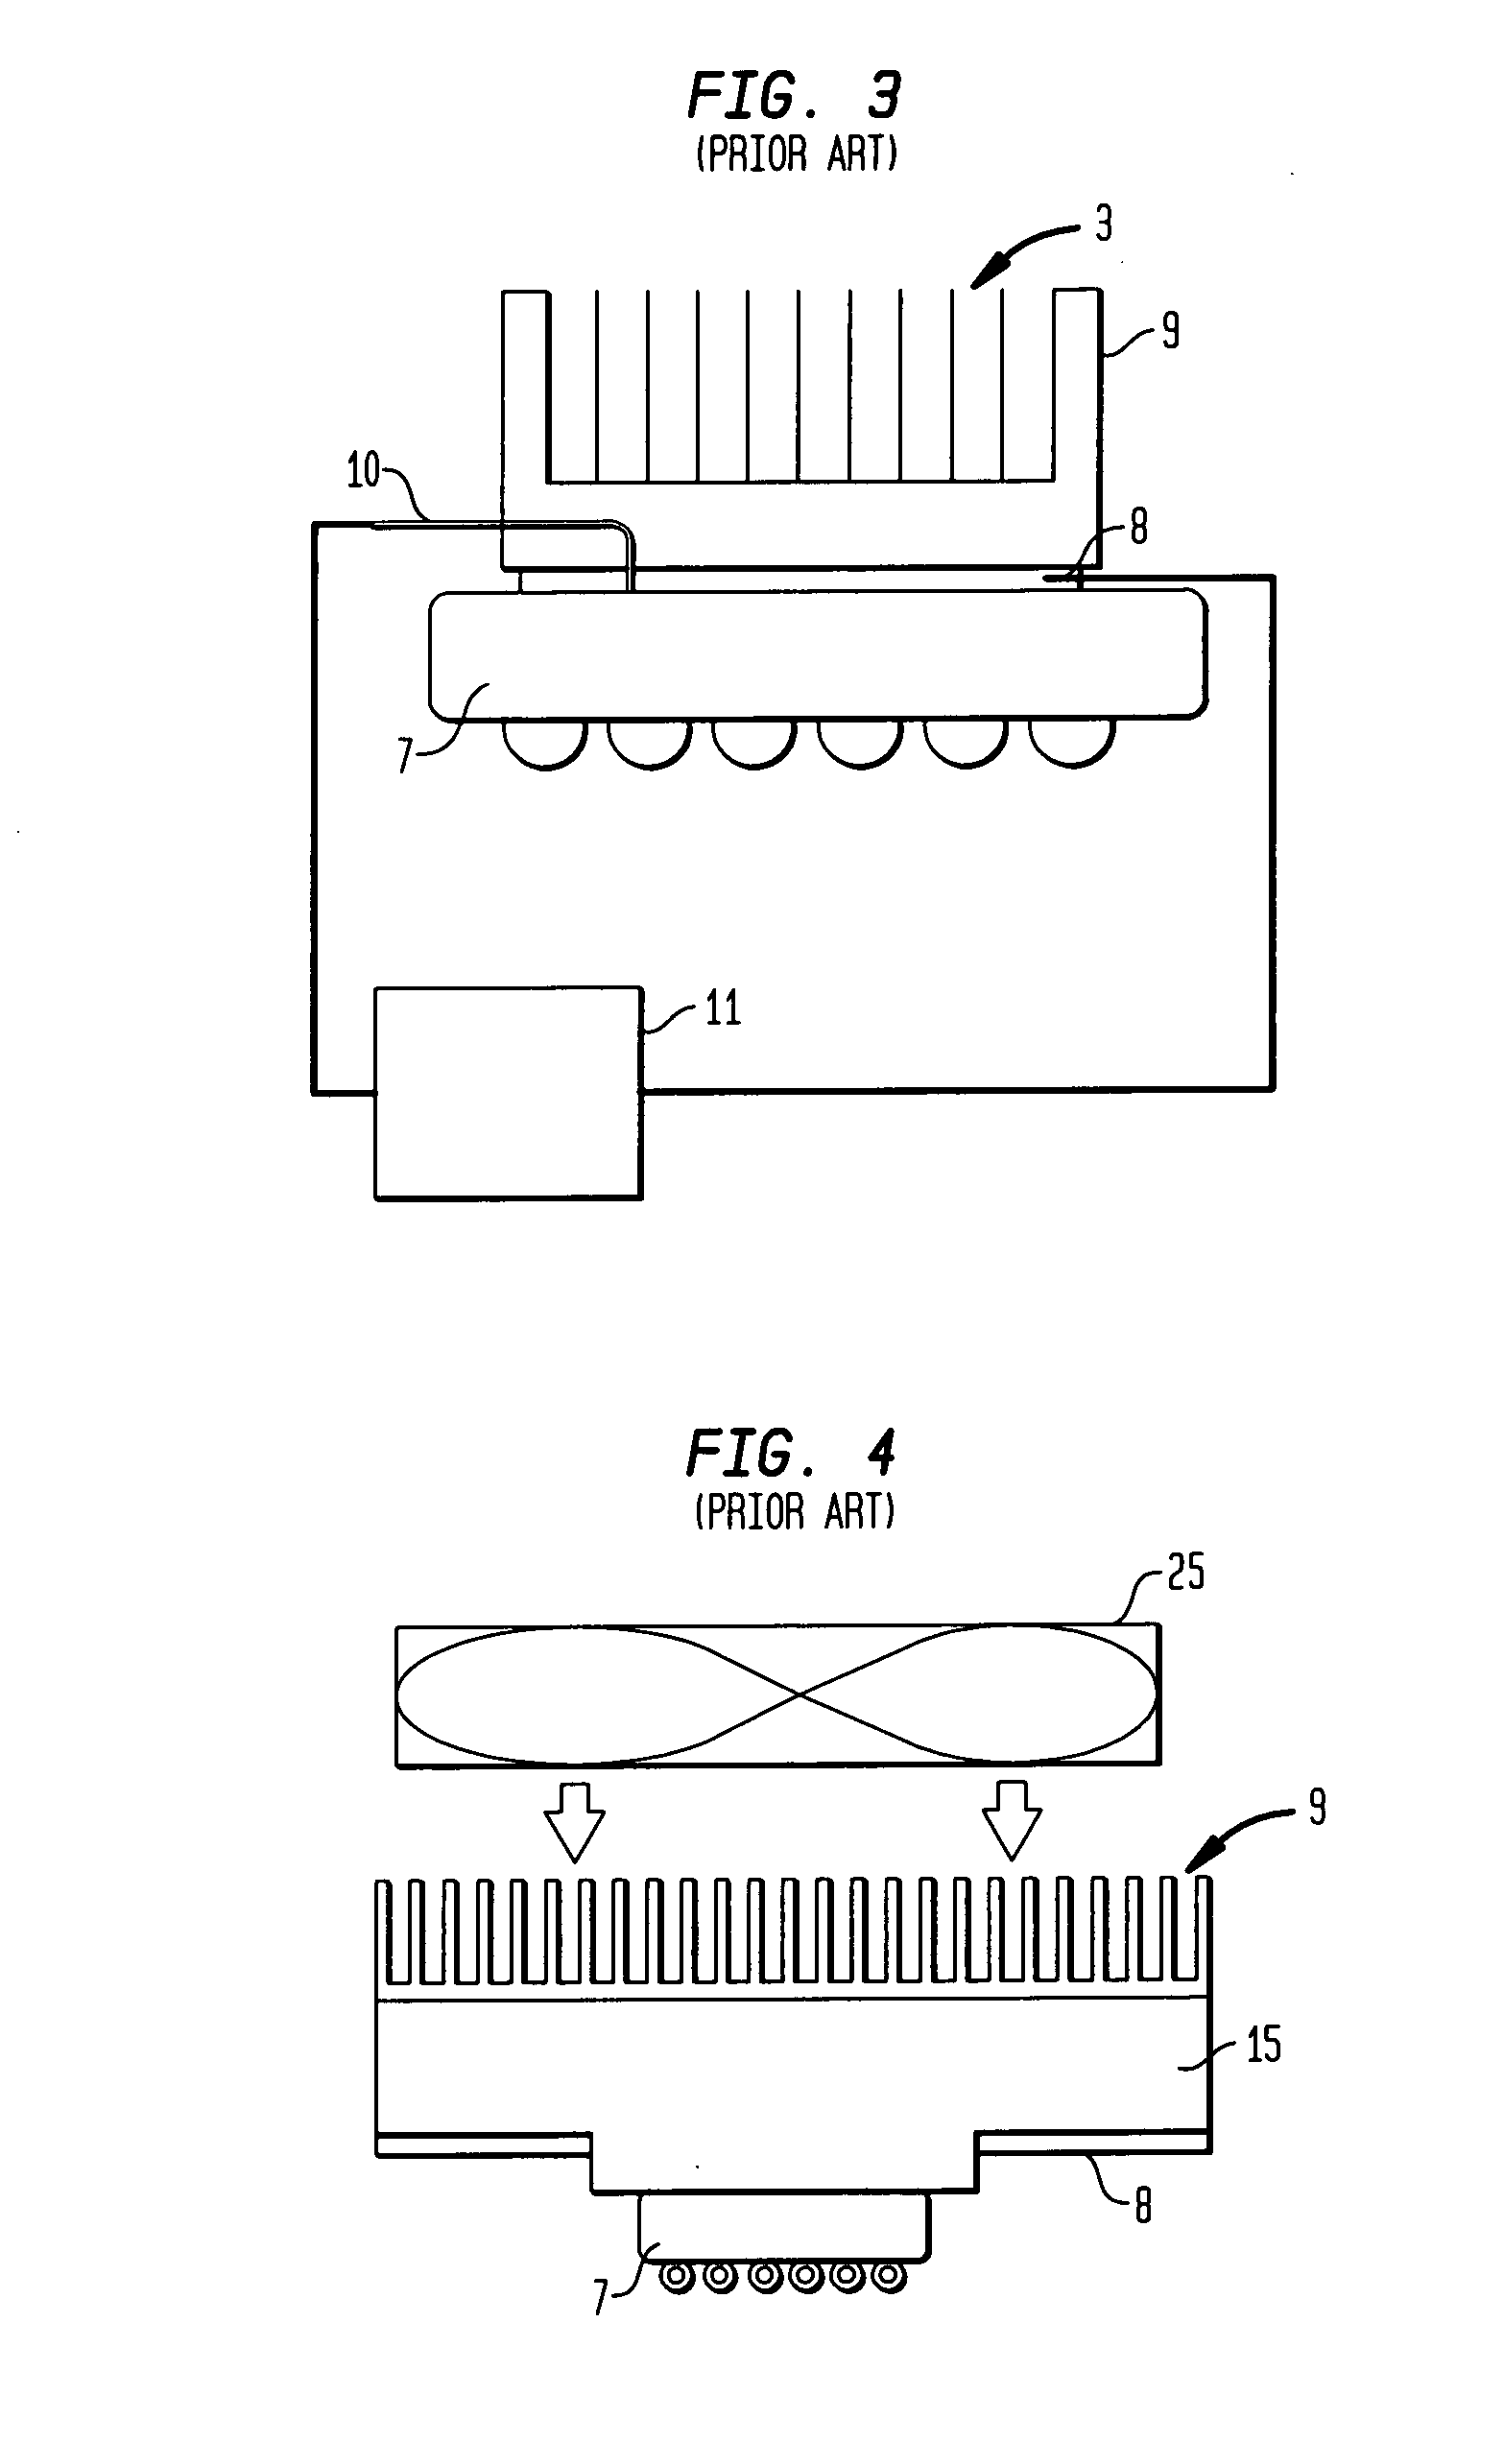 Thermal control unit for semiconductor testing